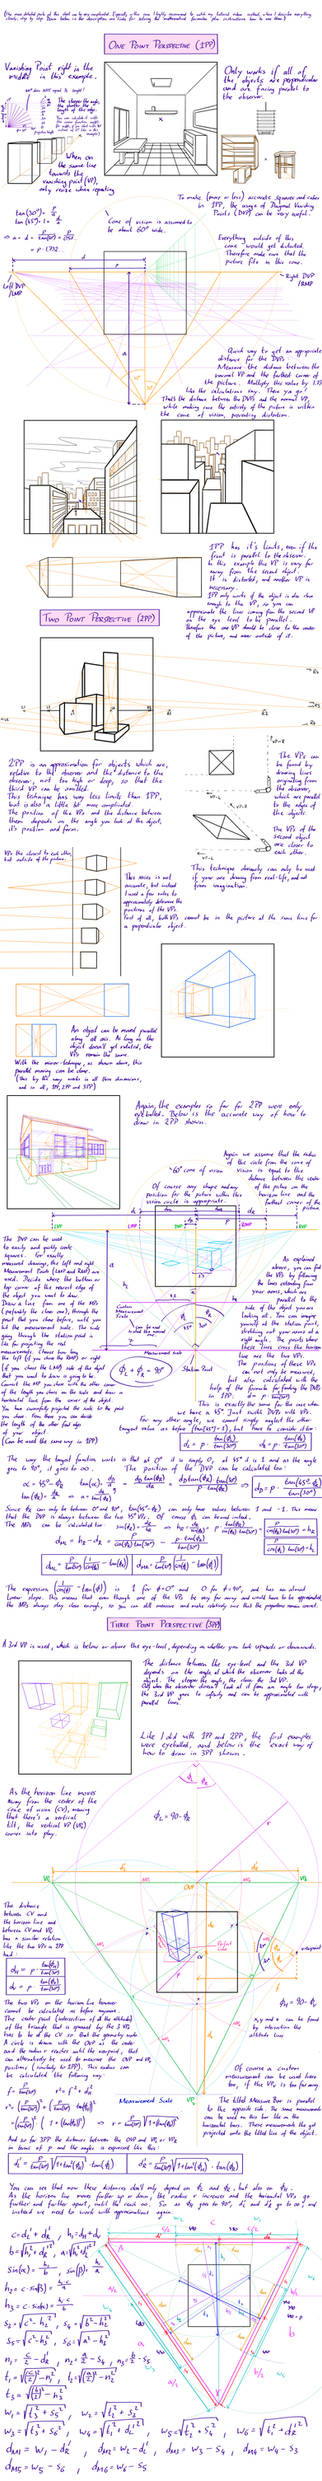 Perspective - research and practice sheet